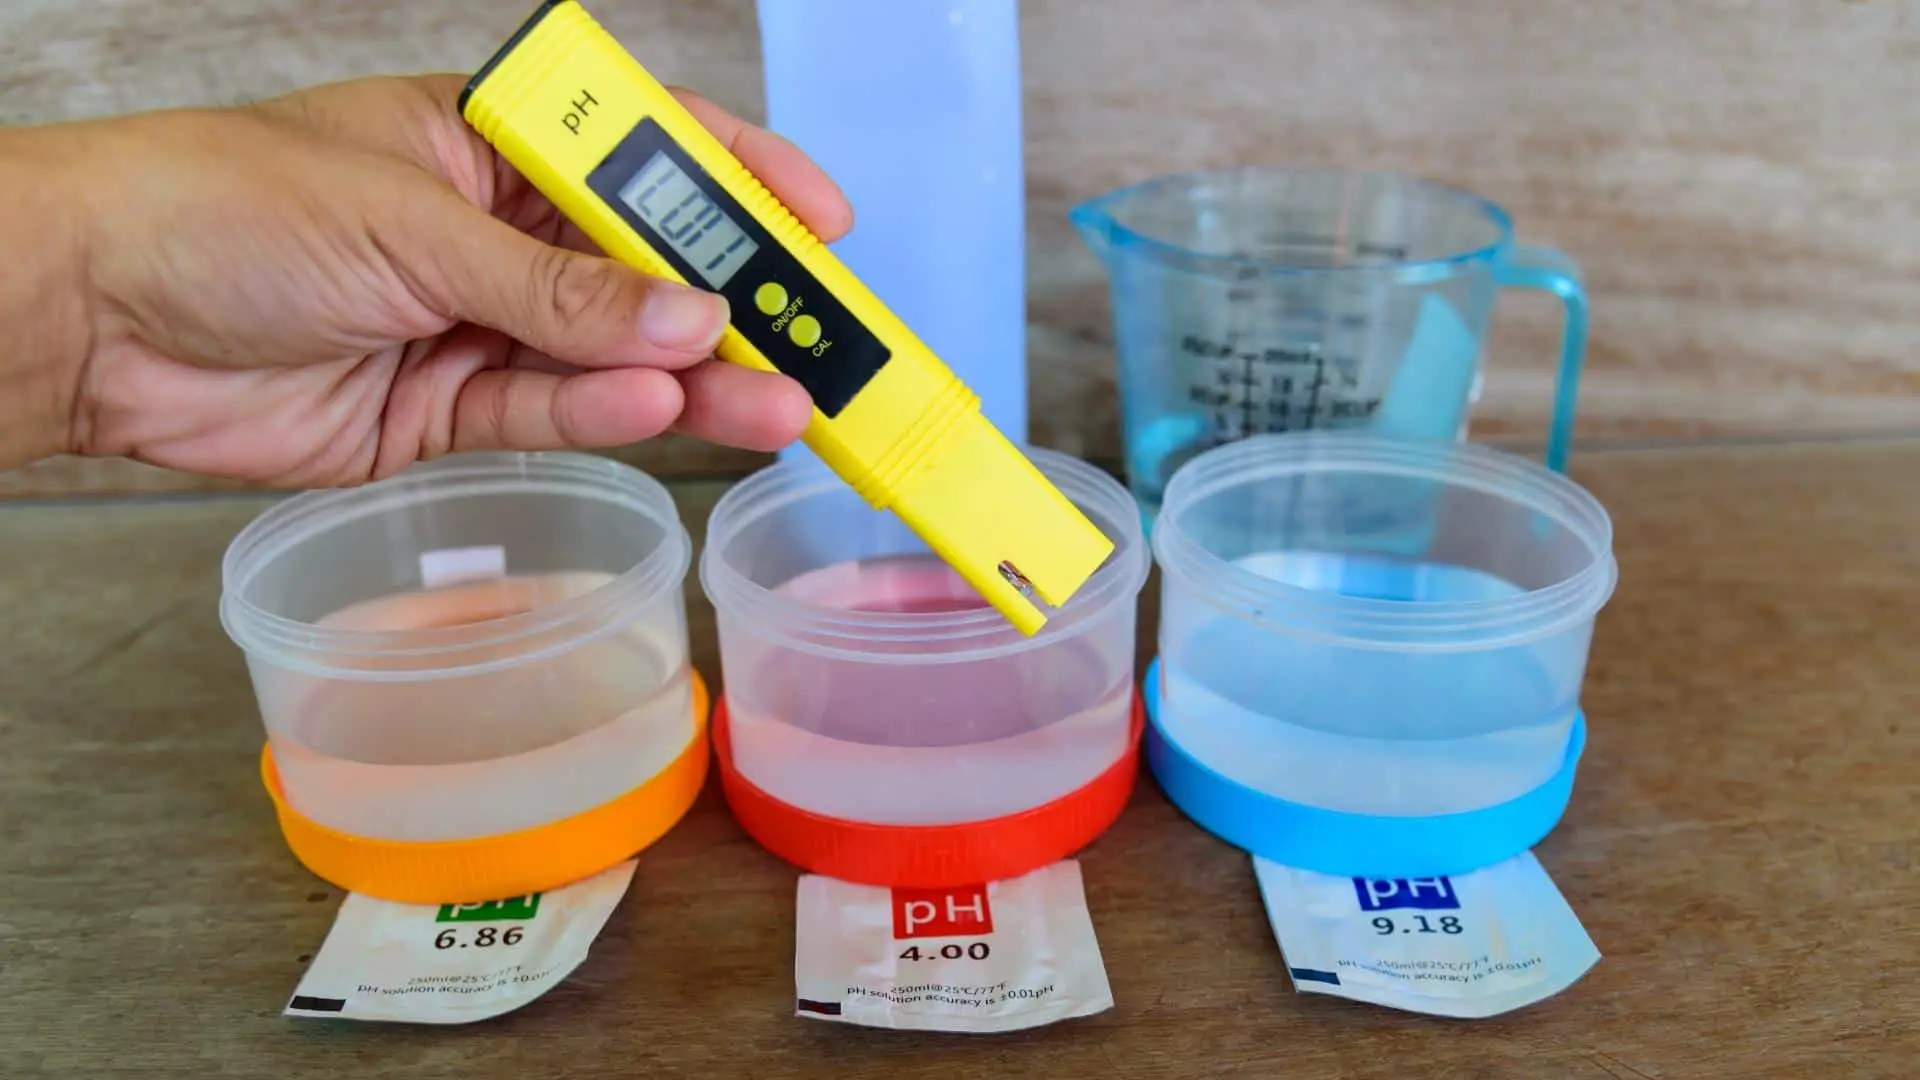 % Find out why your pH meter might be giving you incorrect readings and what steps to take if they are. It's important that you have accurate measurements of the acidity or alkalinity of a solution in your hydroponics.